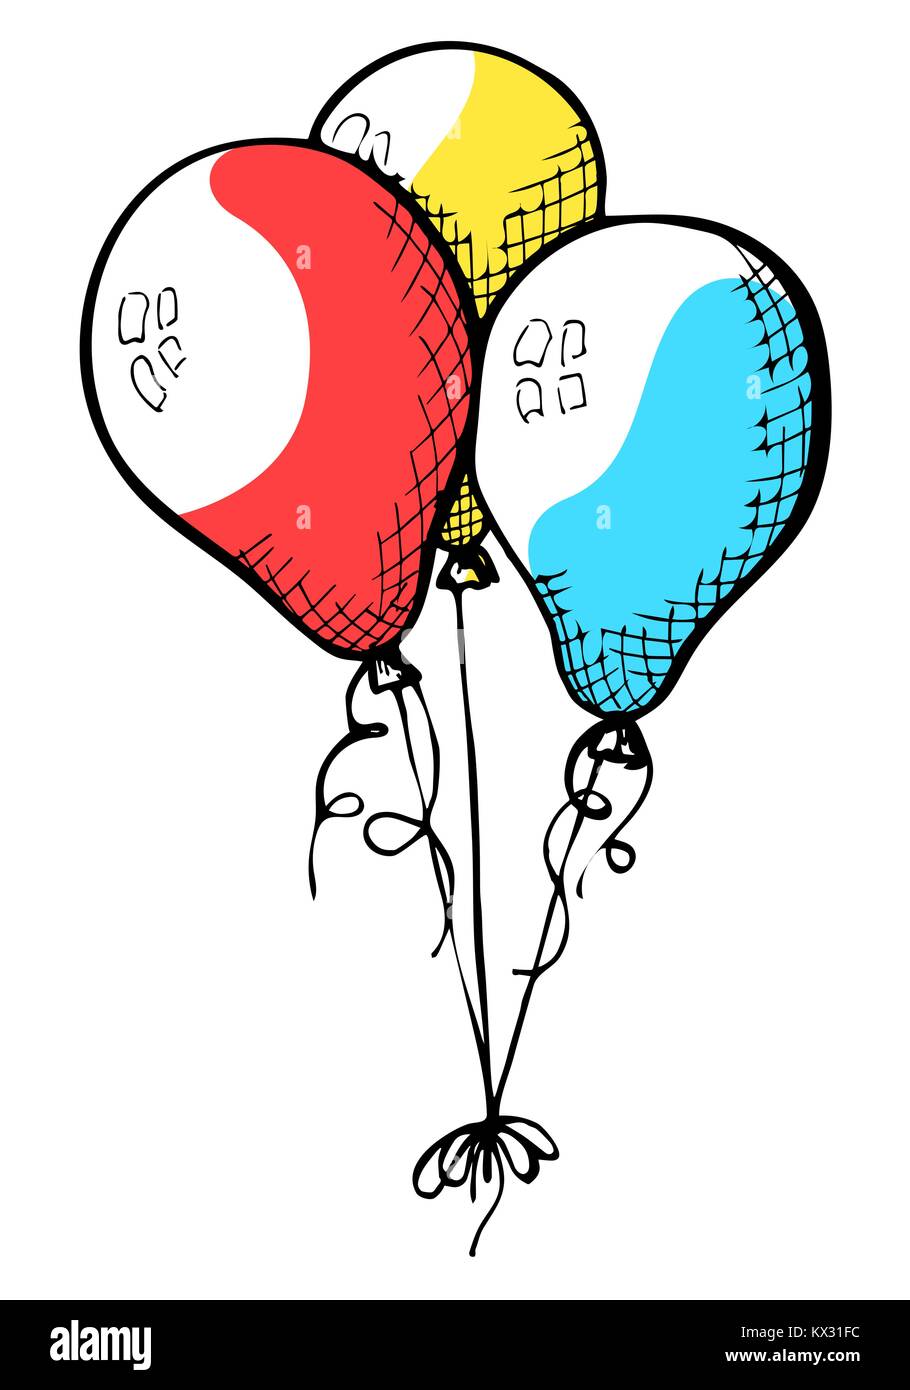 https://c8.alamy.com/comp/KX31FC/three-balloons-on-a-string-hand-drawn-isolated-on-a-white-background-KX31FC.jpg